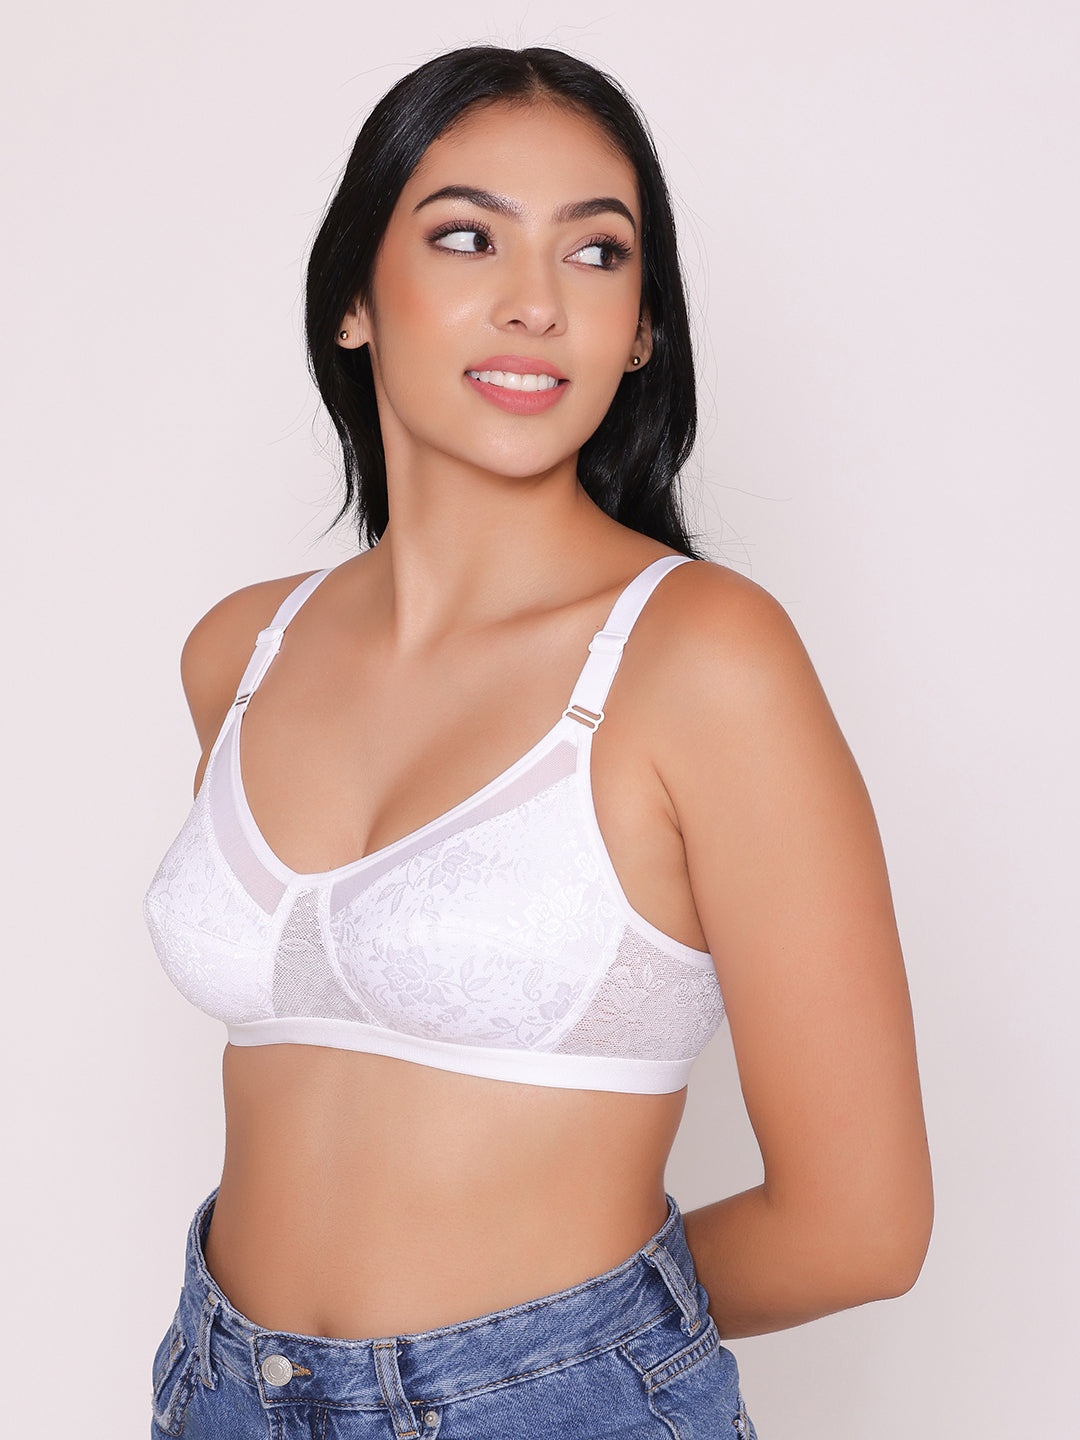 Buy INKURV Everyday Bra for Women Full Coverage with Rich Micro